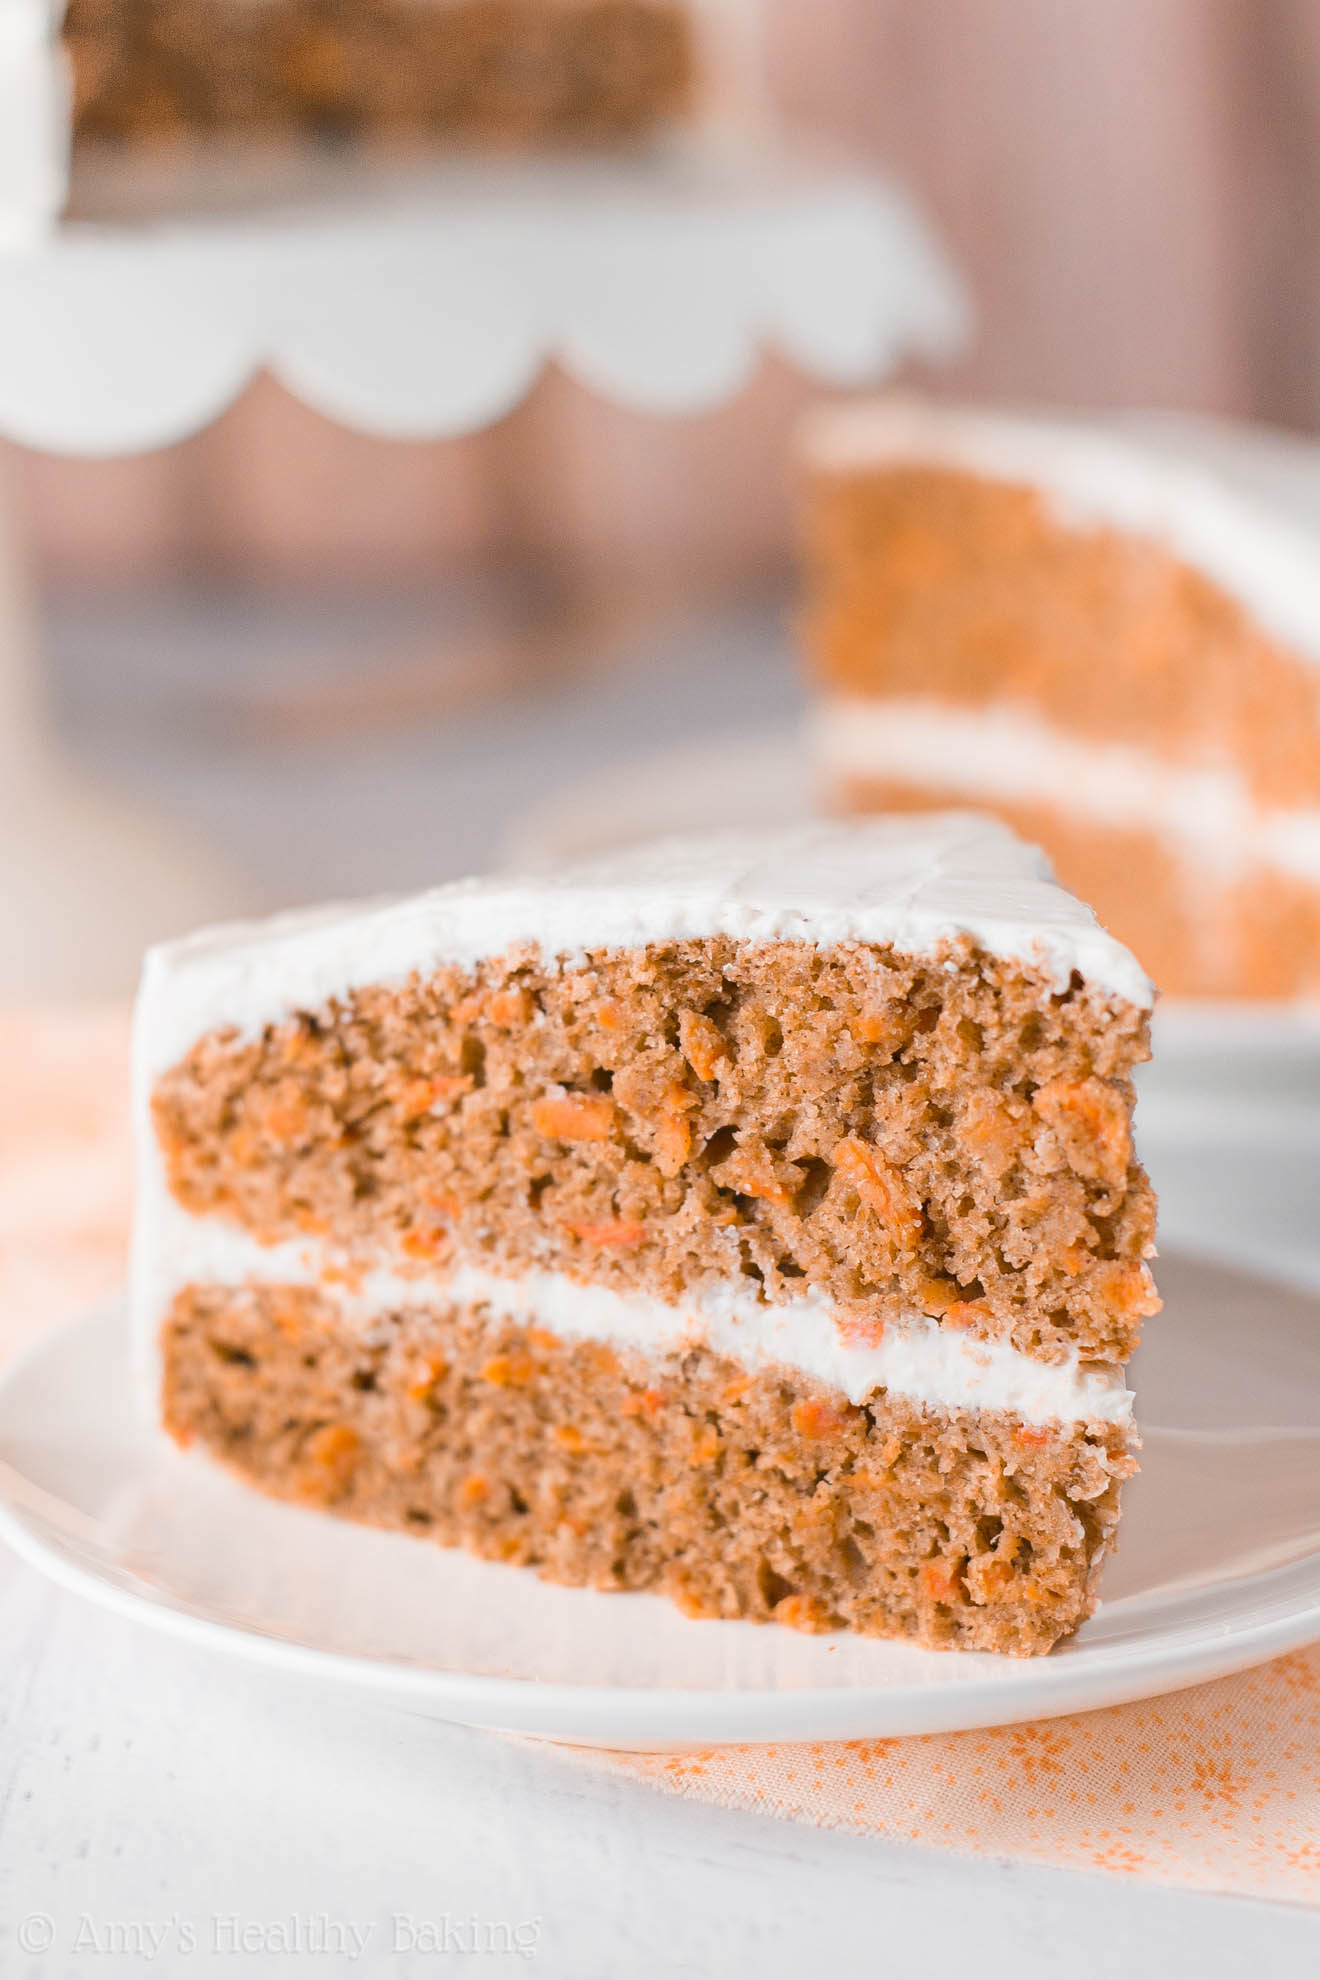 Carrot Cake Healthy
 The Ultimate Healthy Carrot Cake